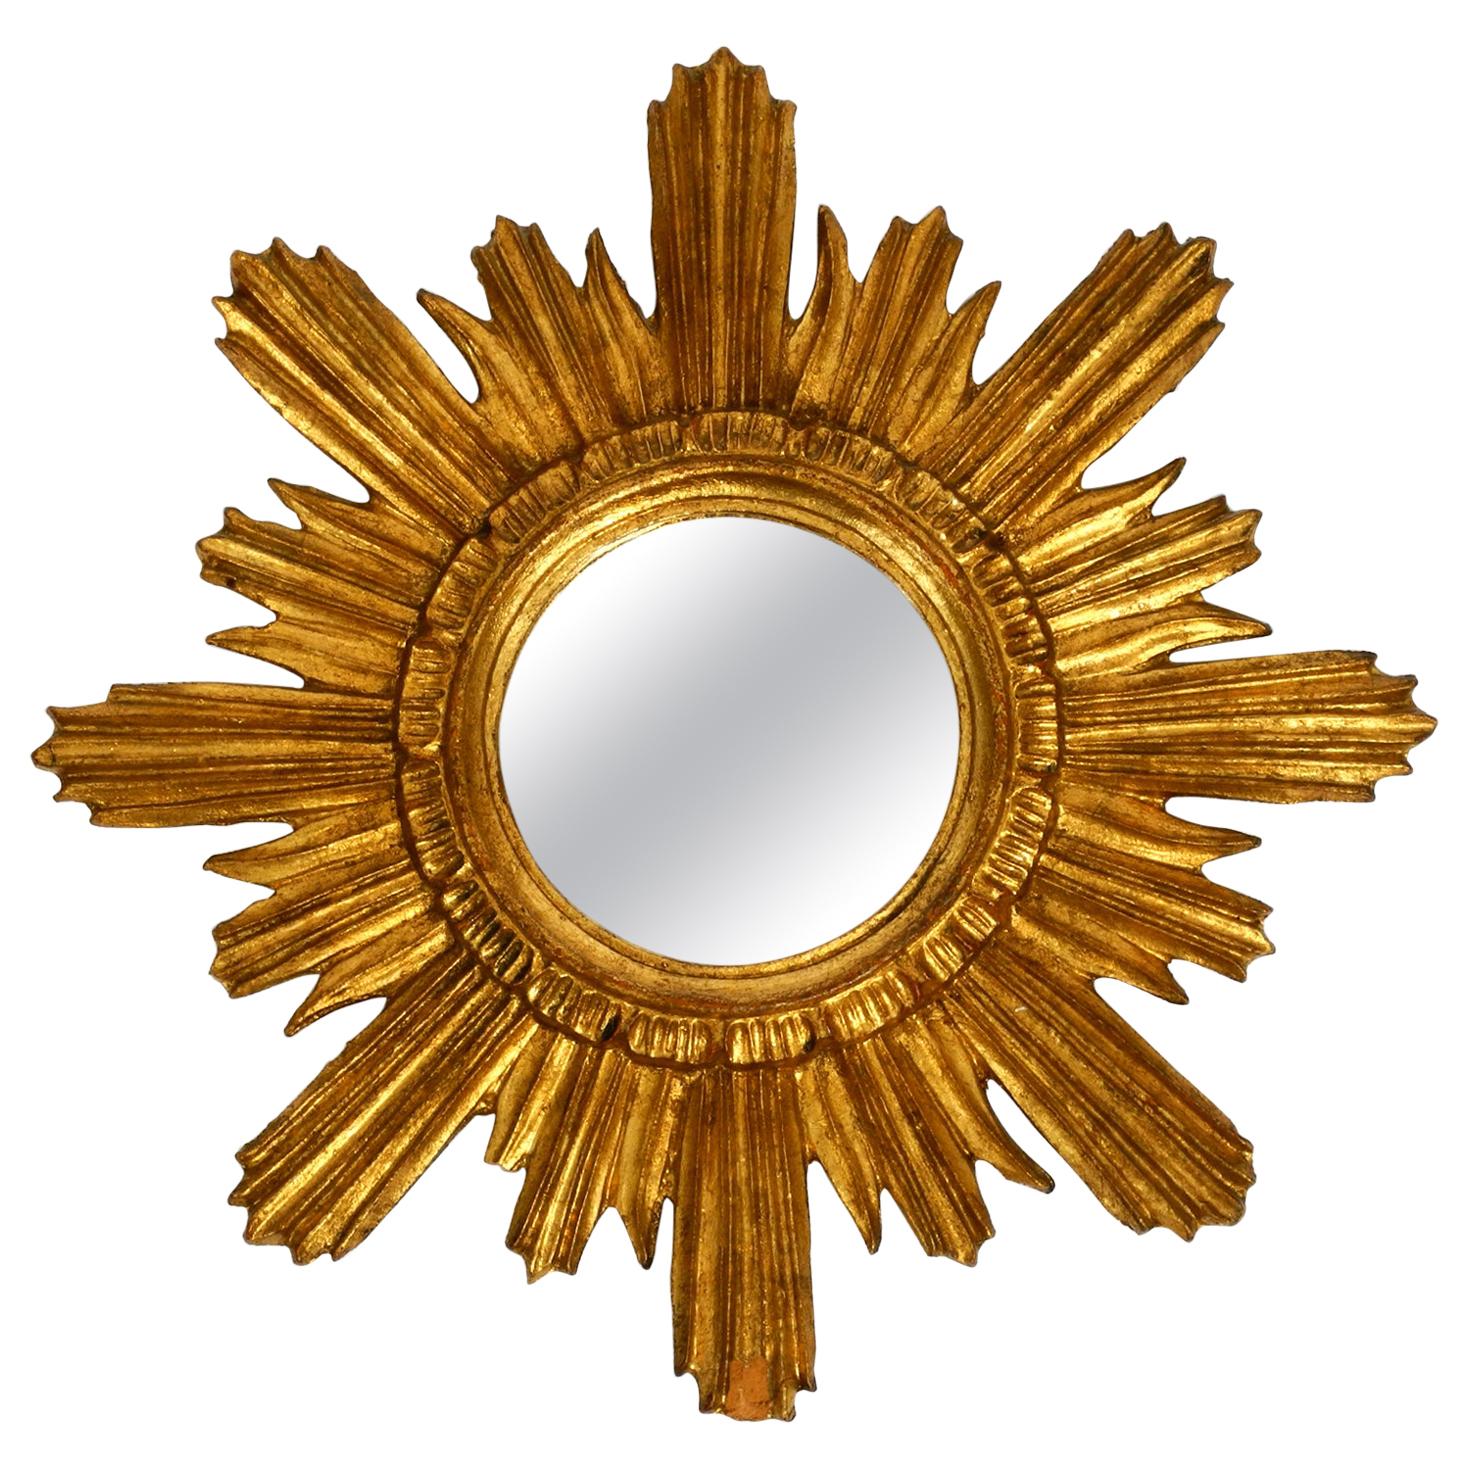 Beautiful Midcentury Sunburst Wall Mirror Made of Wood in Golden Color